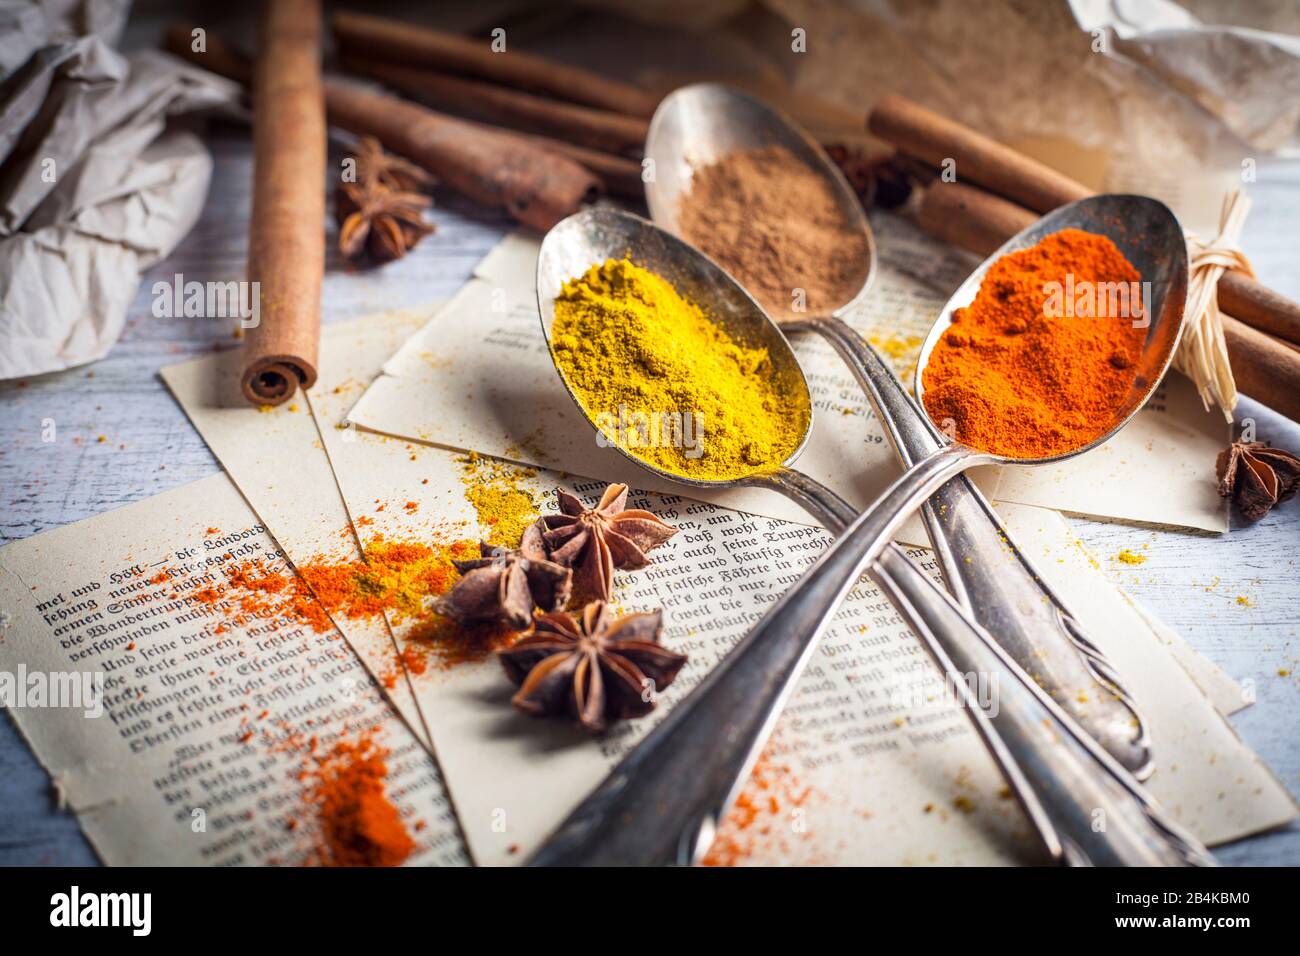 Spices on silver spoons on old book pages Stock Photo